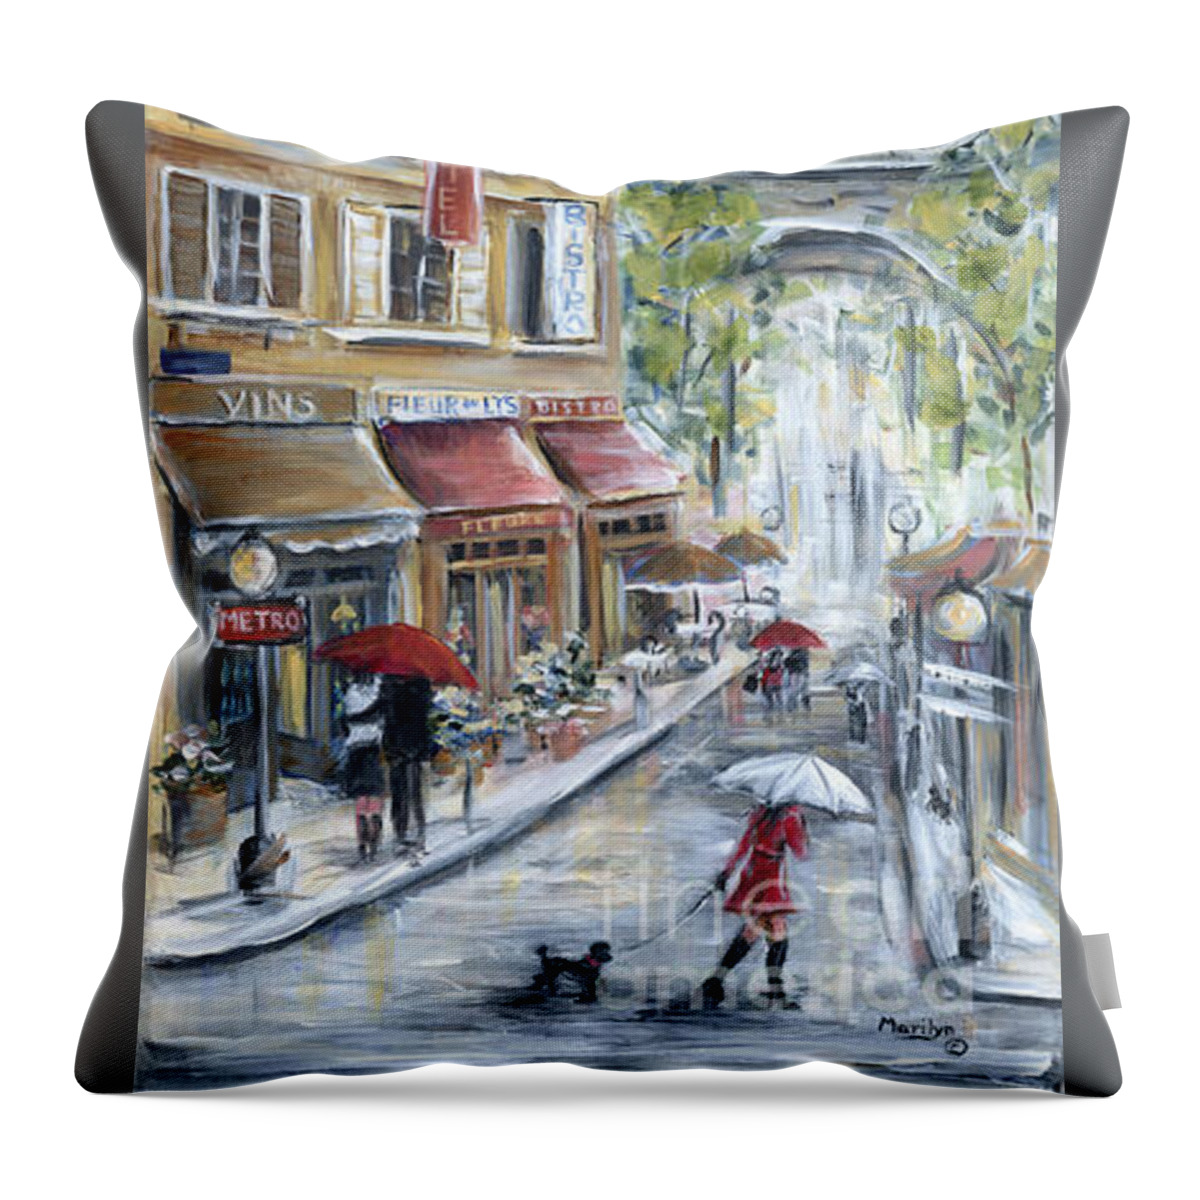 Paris Throw Pillow featuring the painting Poodle In Paris by Marilyn Dunlap